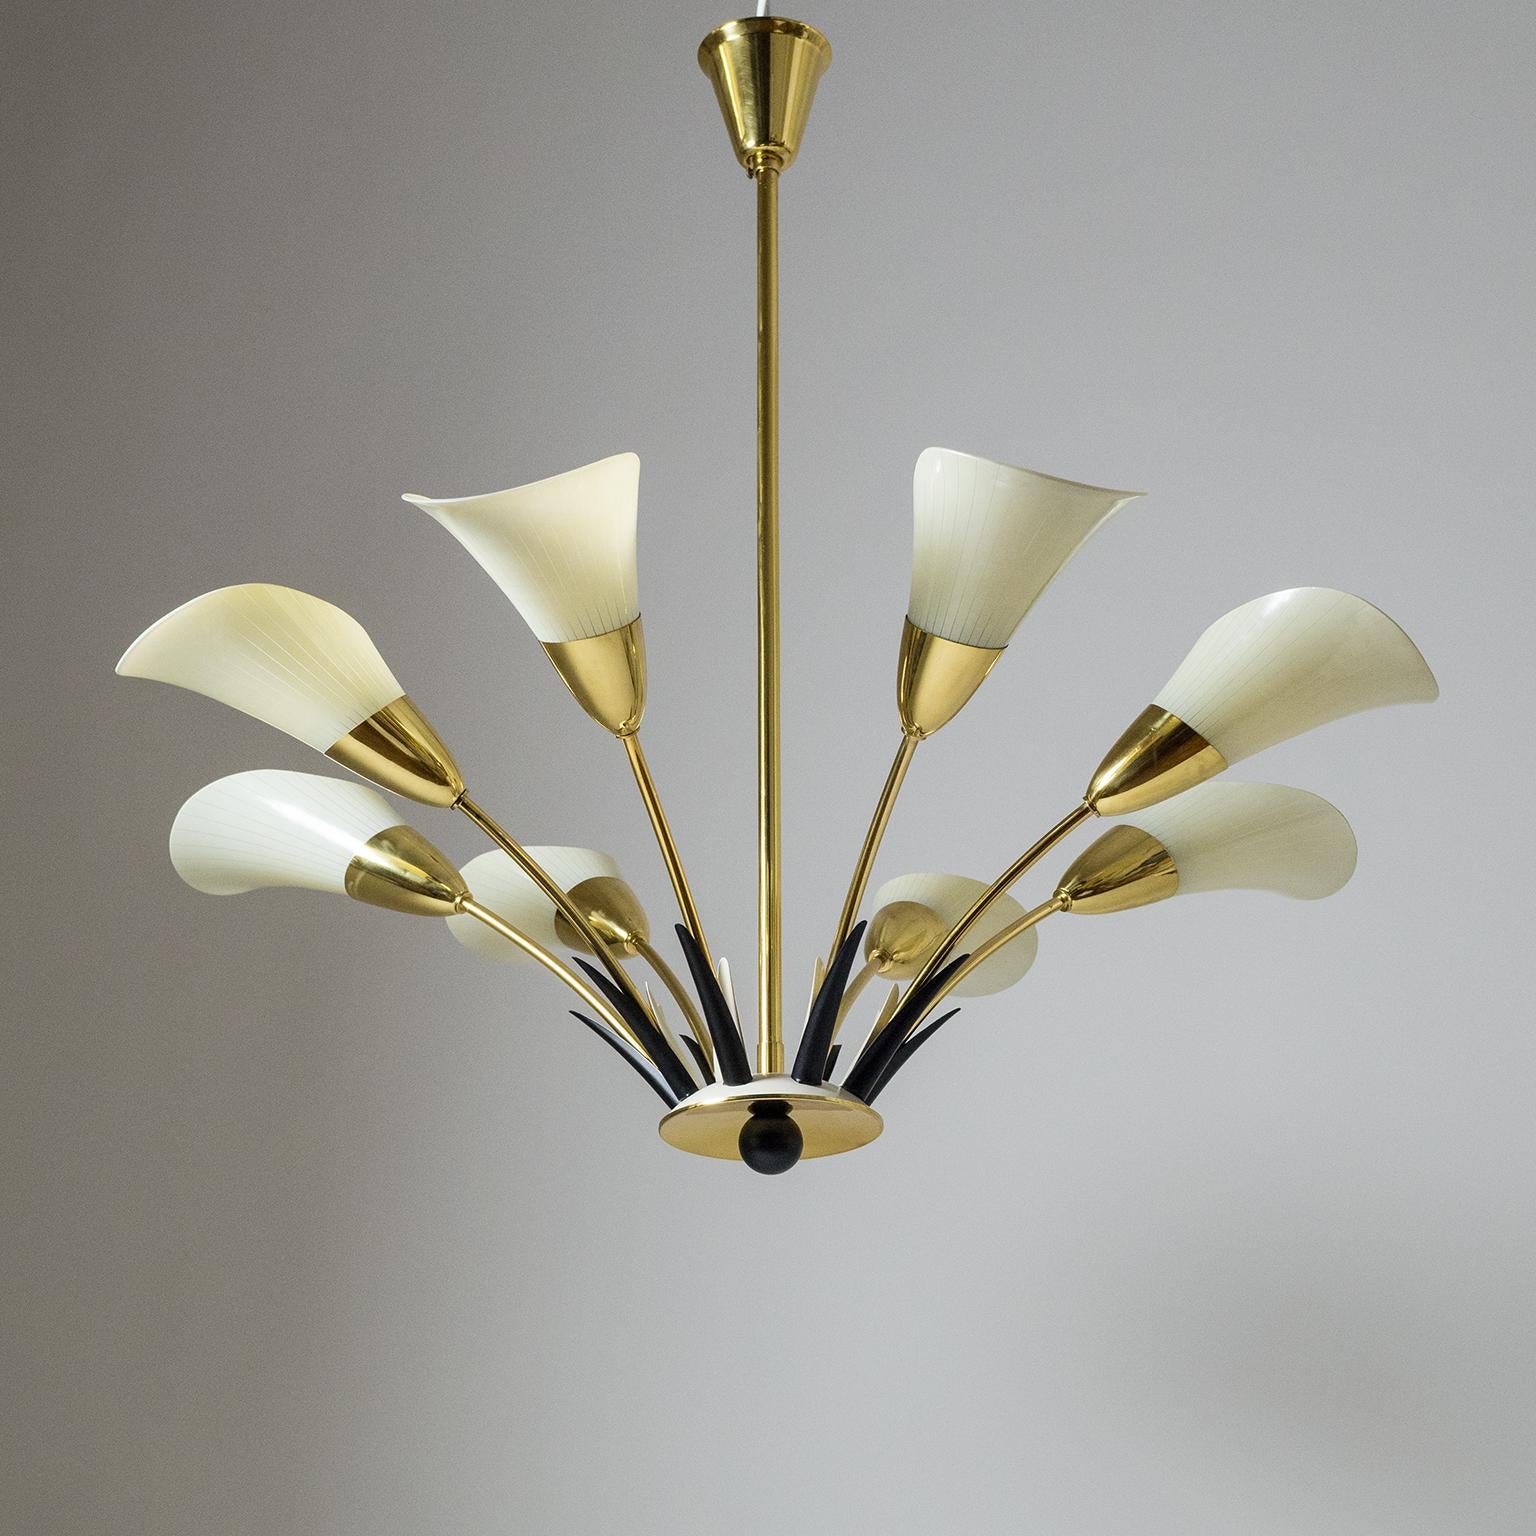 Rare eight-arm chandelier with Calla shaped glass diffusers which are enameled with an ivory colored pinstripe decor. Apart from the glass the chandelier is made entirely of brass including the lacquered parts. Beautiful delicate design with a very